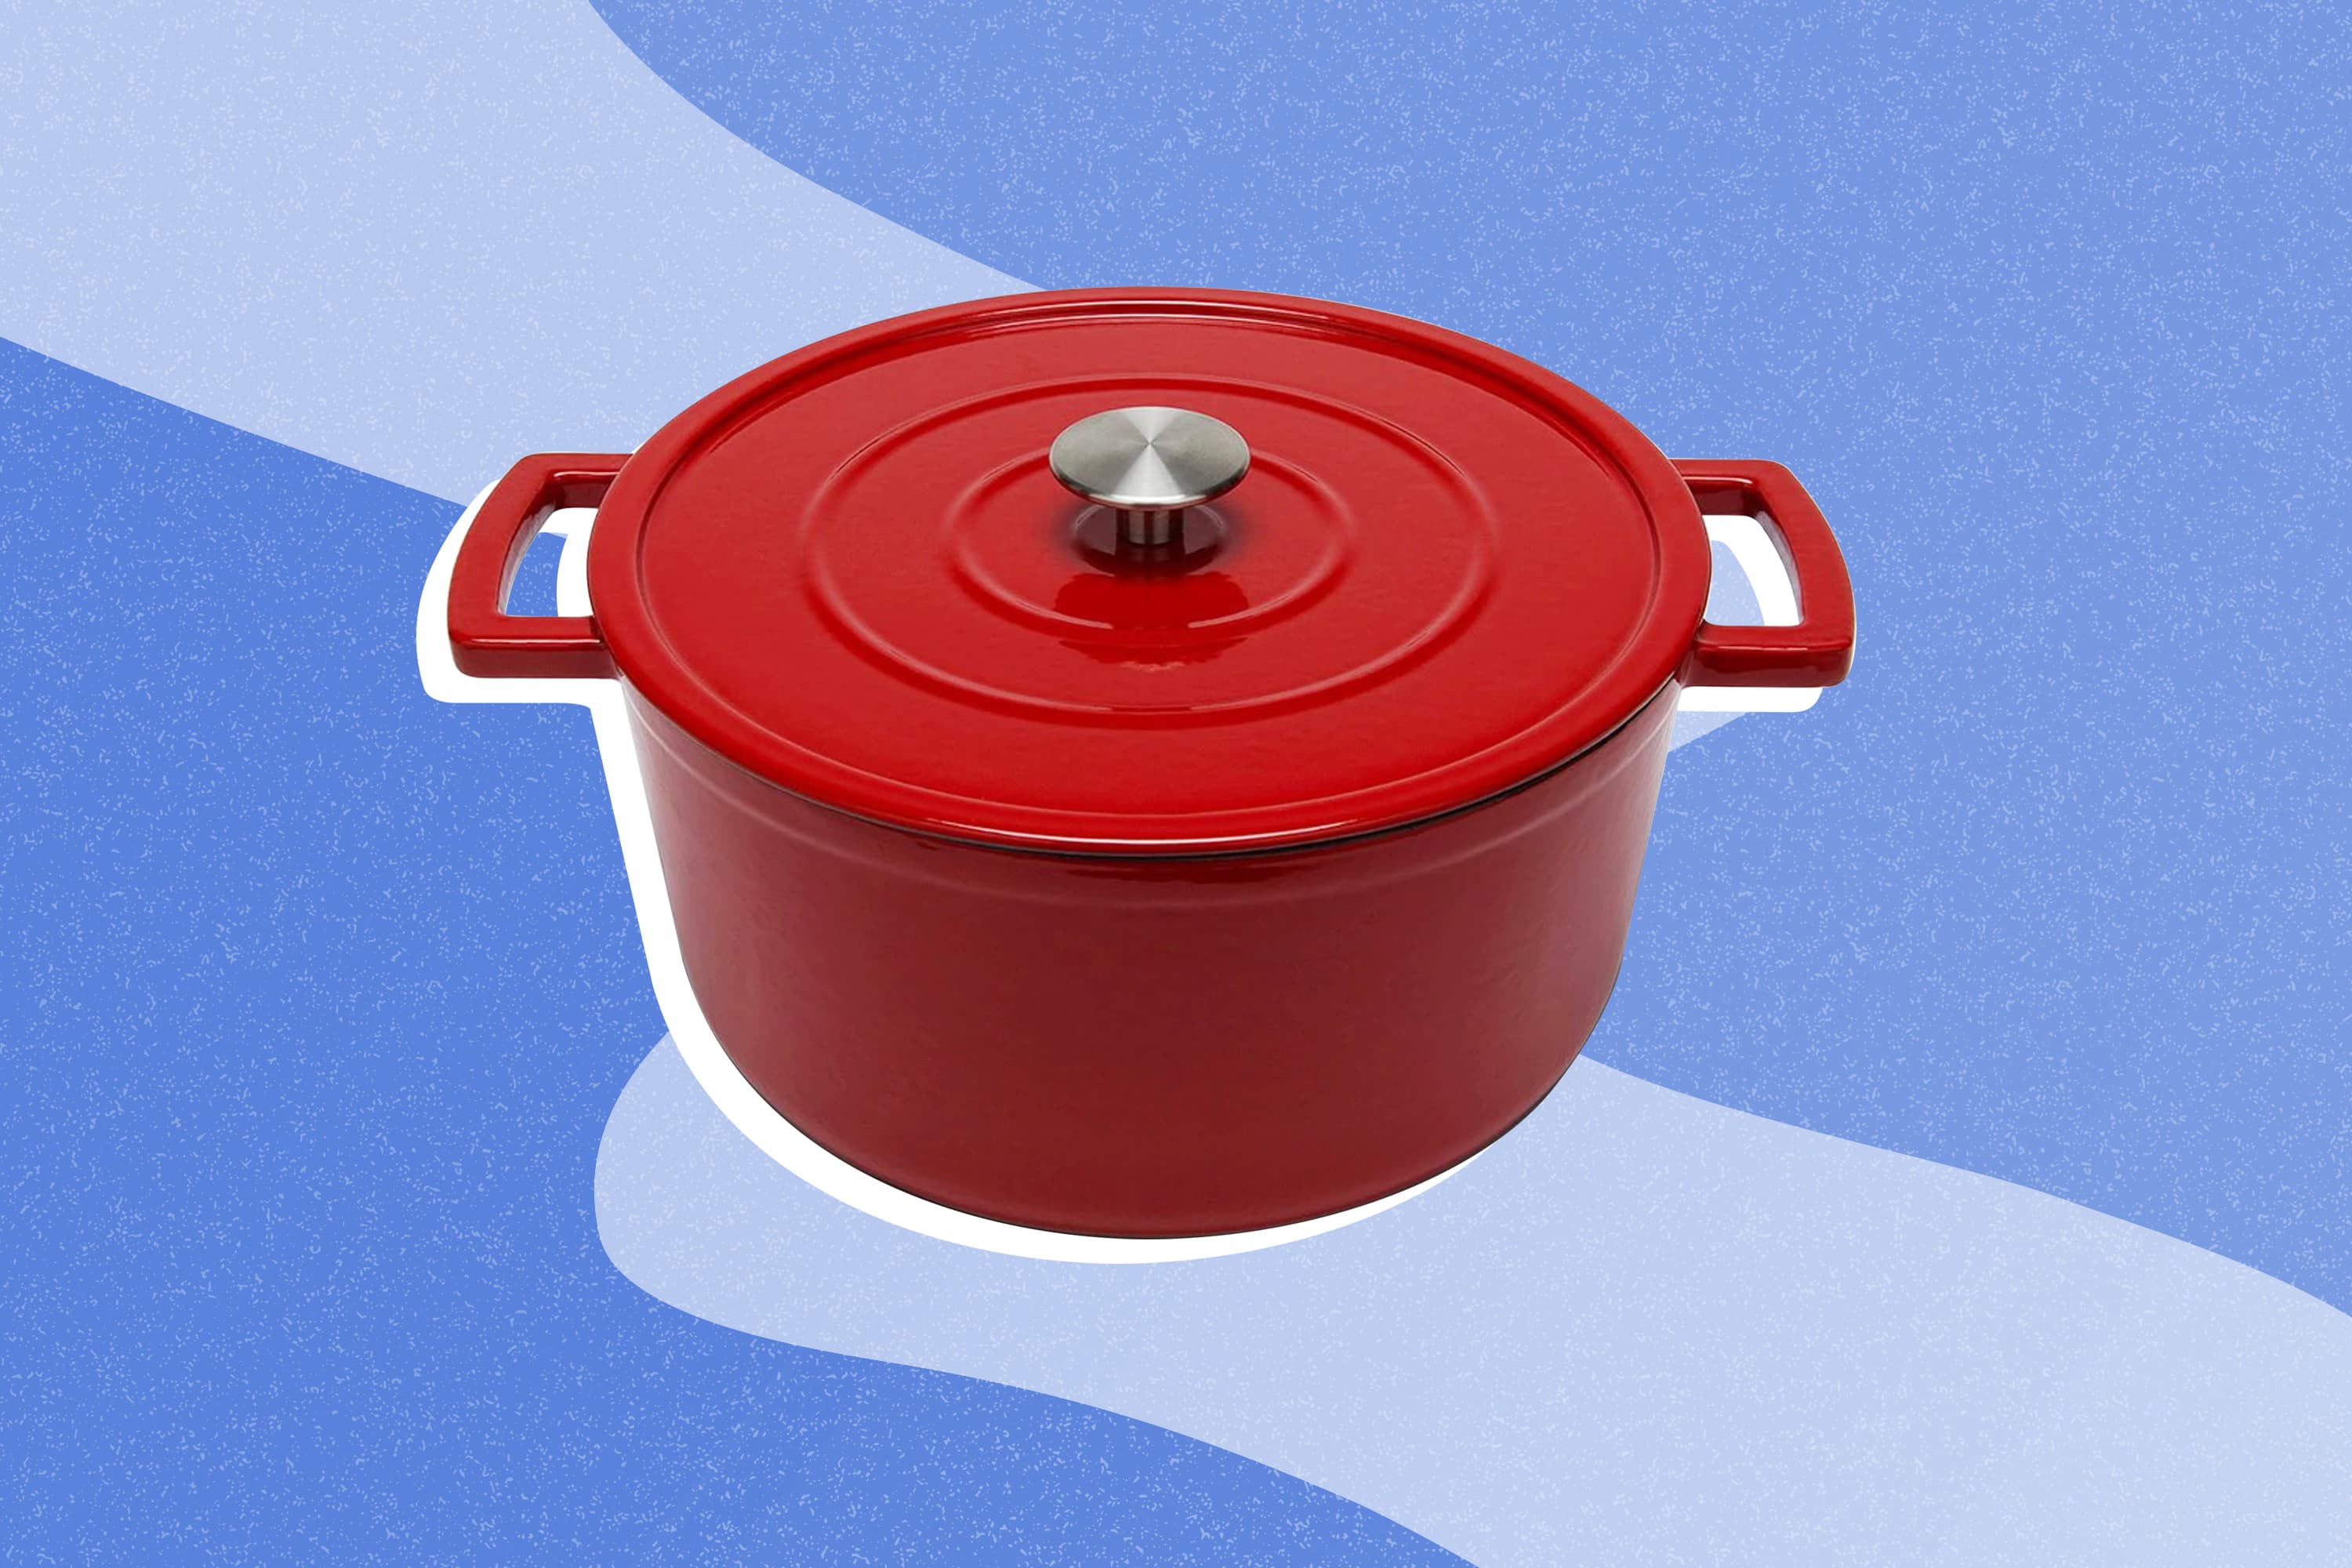 Lodge 6-Qt. Cherry on Top Red USA Enameled Cast Iron Dutch Oven